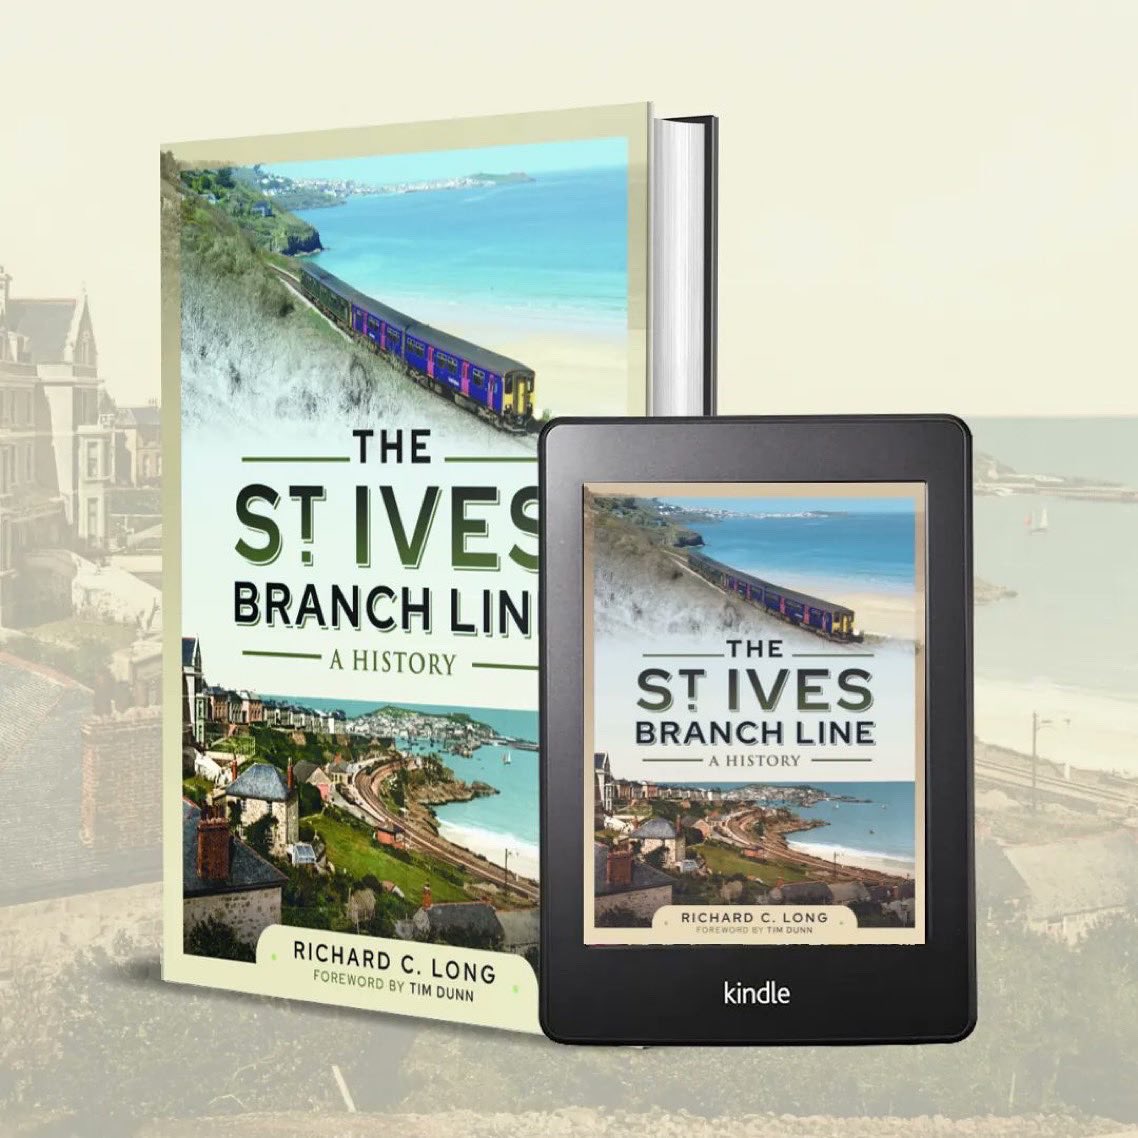 This Bank Holiday weekend you can save 30% off the RRP of my St Ives Branch Line book - and many other Pen & Sword titles - with the code MAYDAY24. pen-and-sword.co.uk/The-St-Ives-Br…